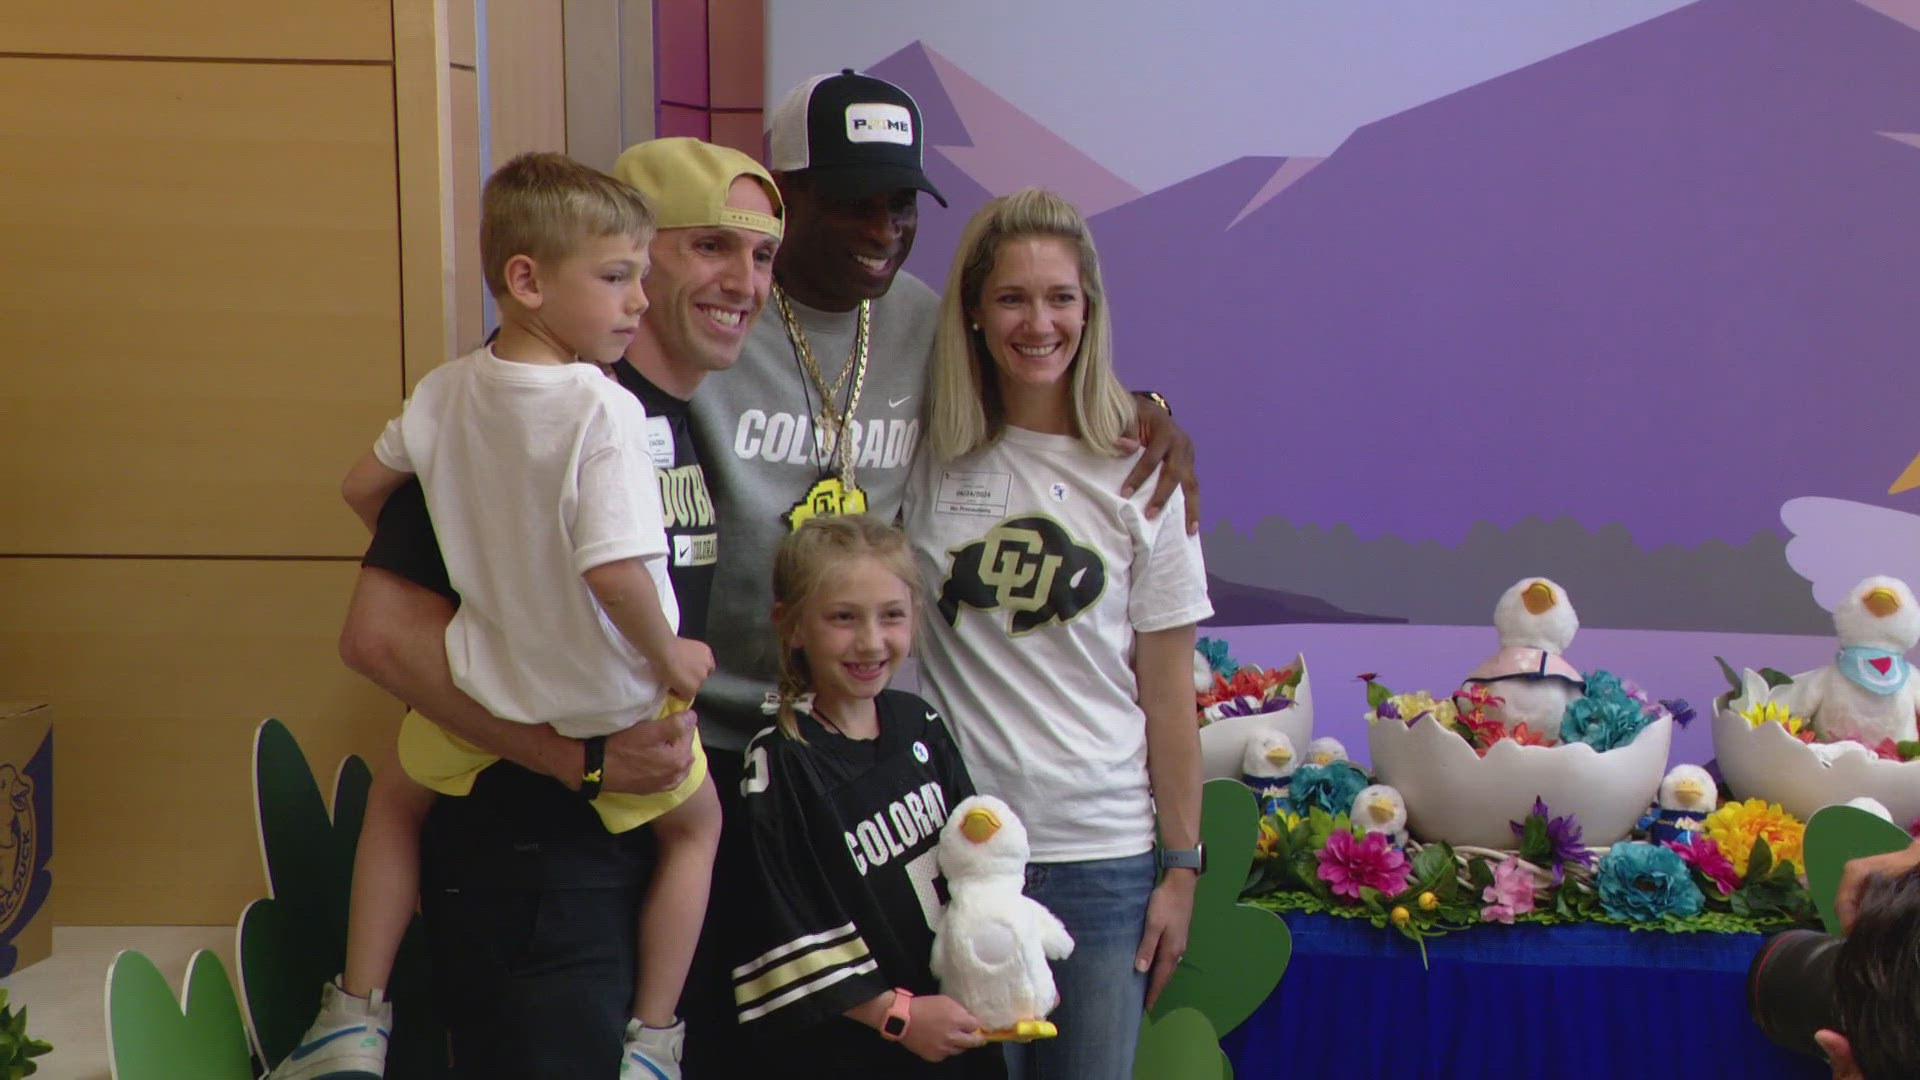 University of Colorado football coach Deion “Coach Prime” Sanders visited children with cancer and sickle cell disease at Children’s Hospital Colorado.